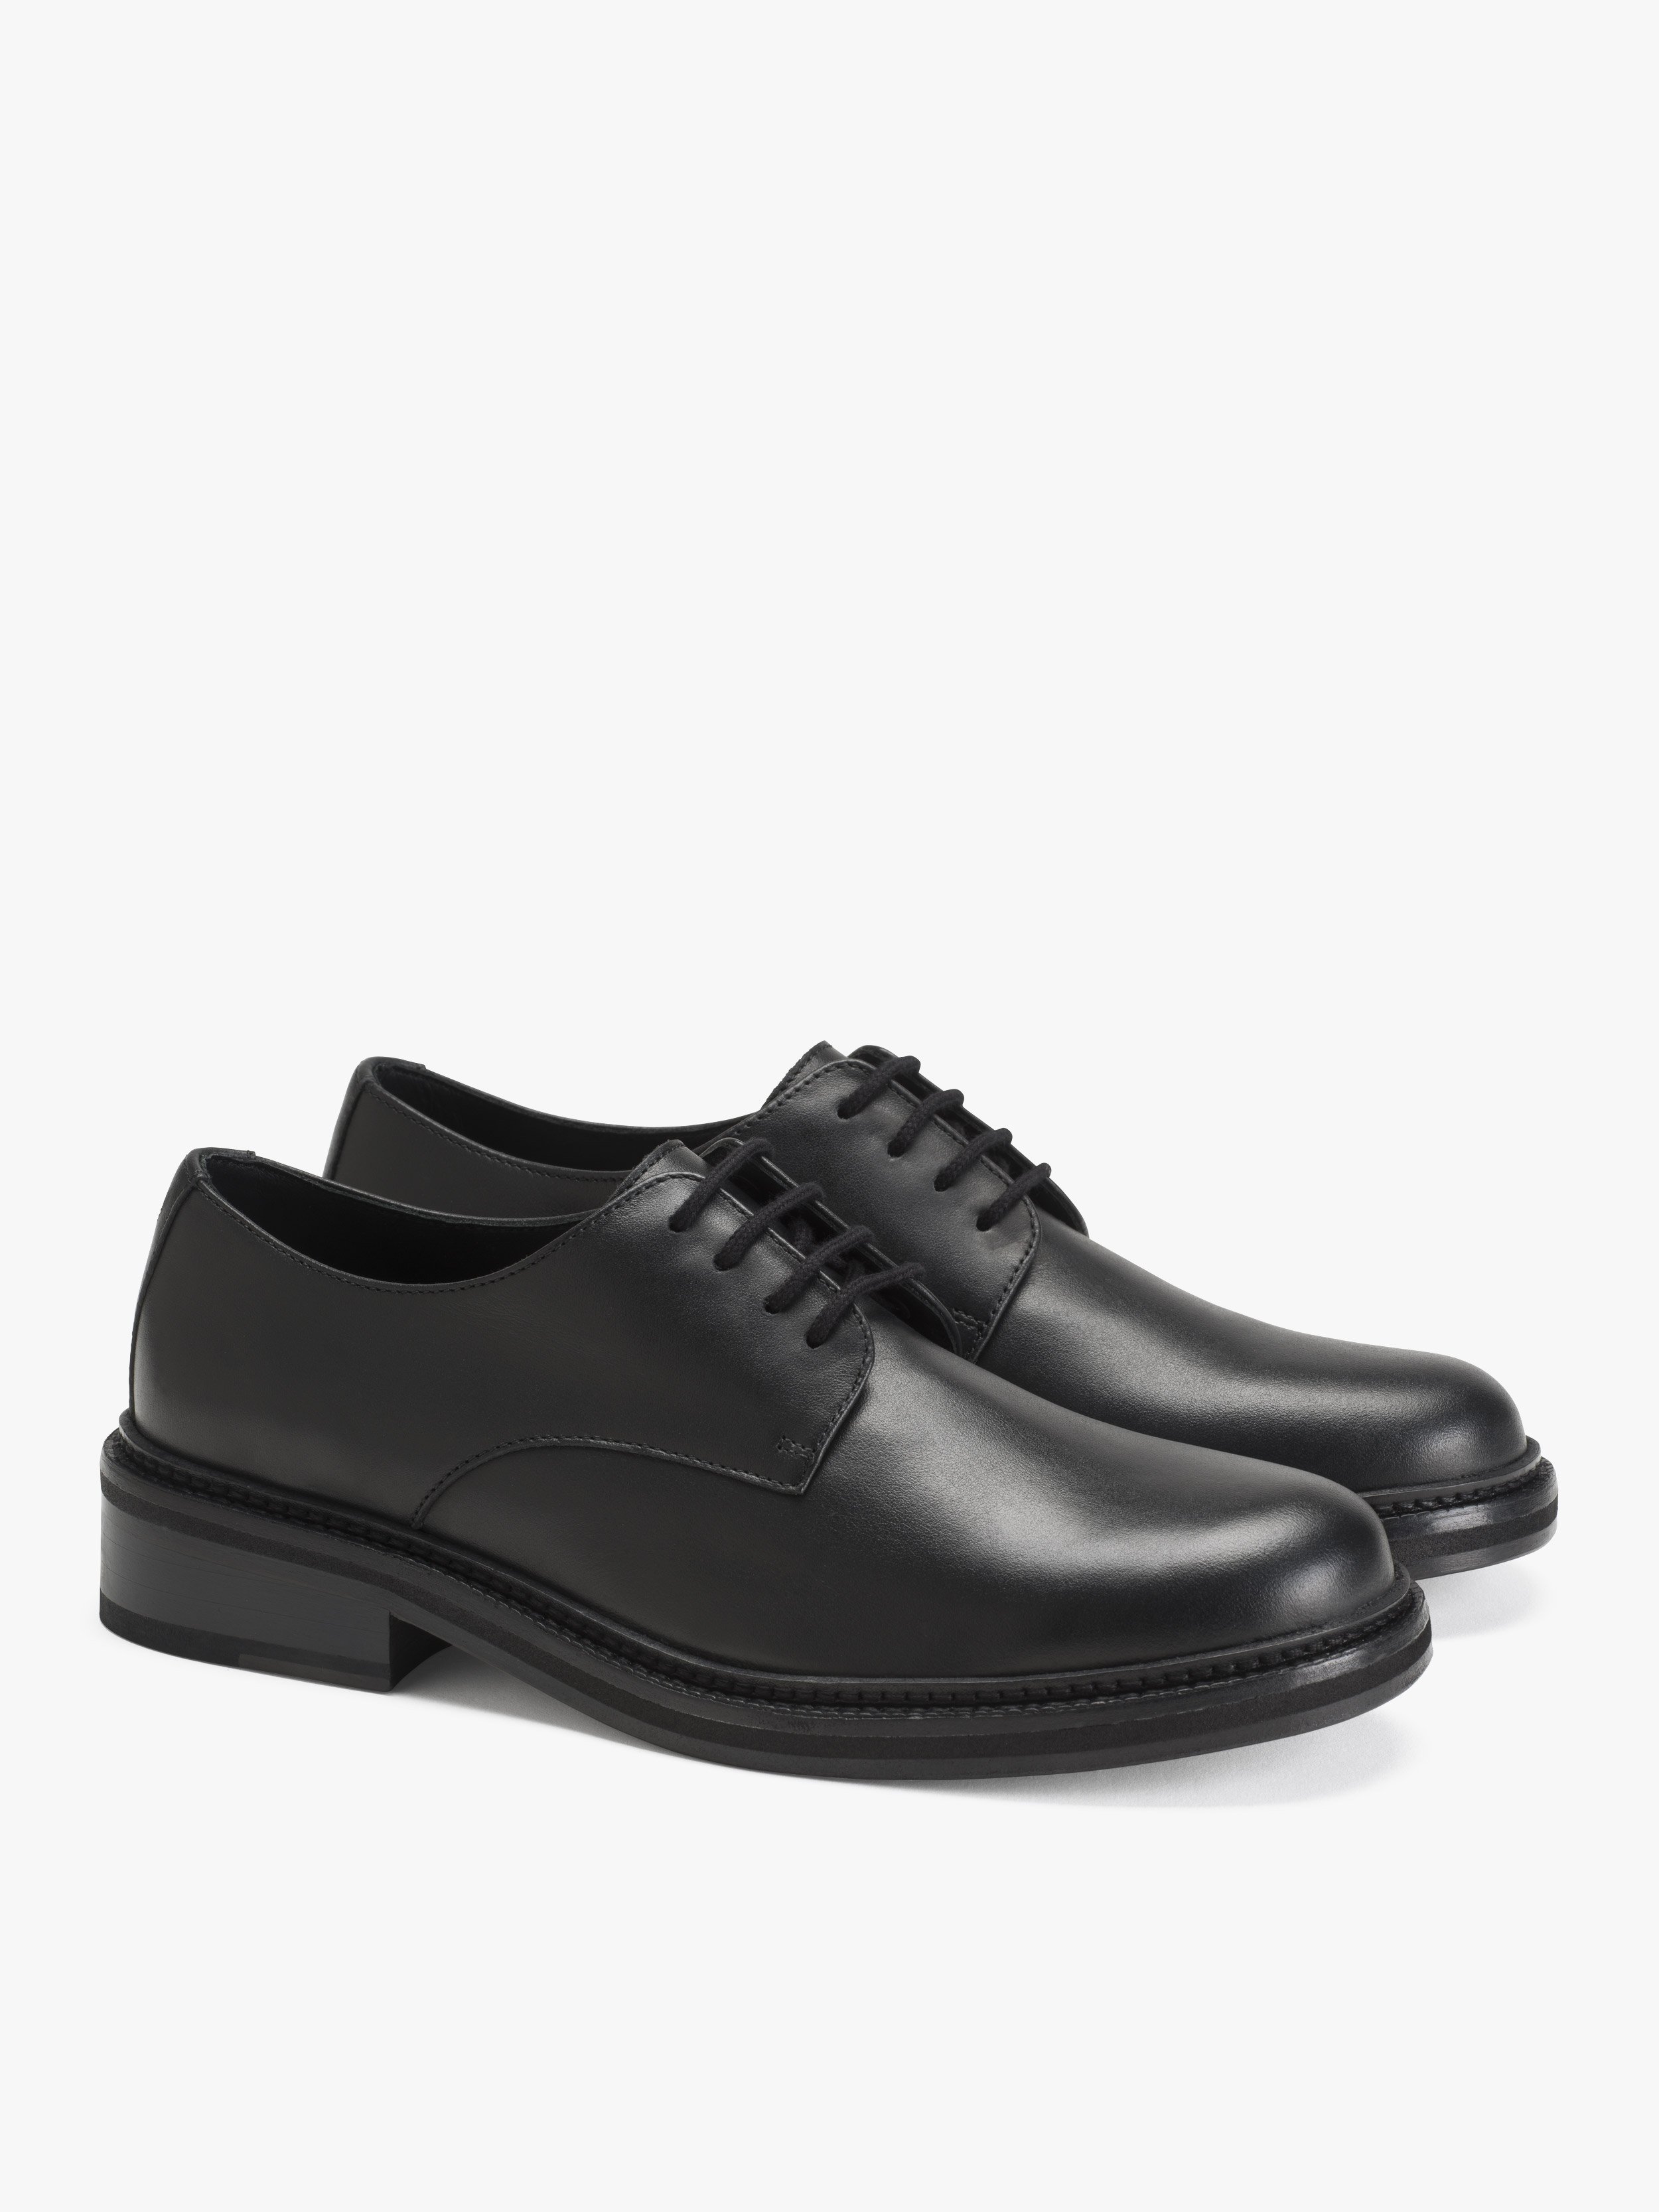 black leather derby shoes